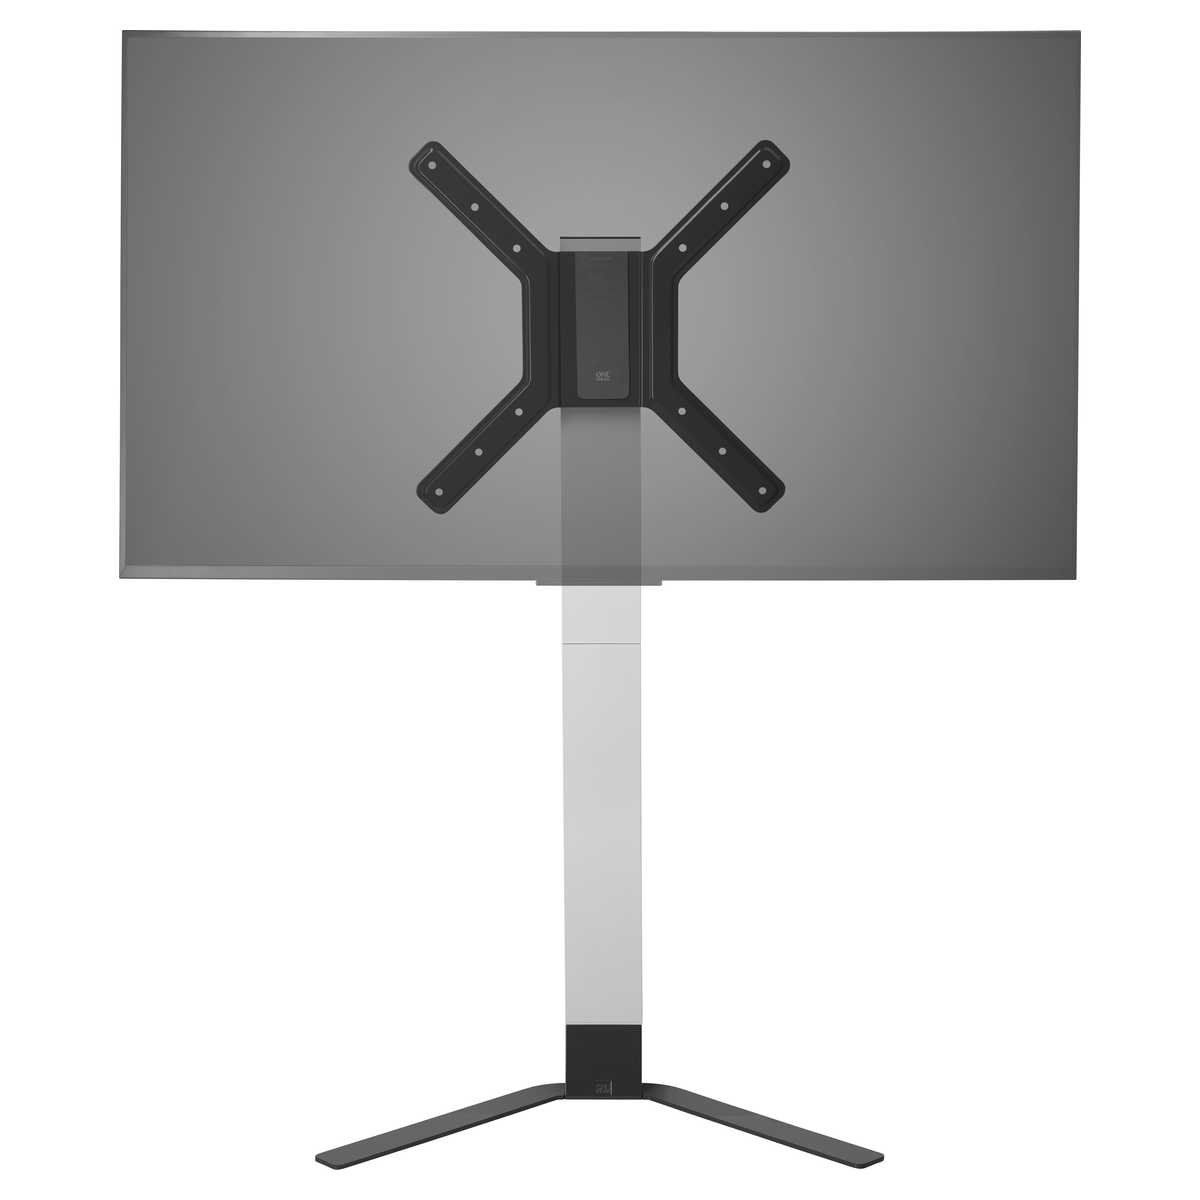 New One For All Wm6471 Ultra Slim Tv Stand For 32 To 60 In Slim Line Tv Stands (View 13 of 15)